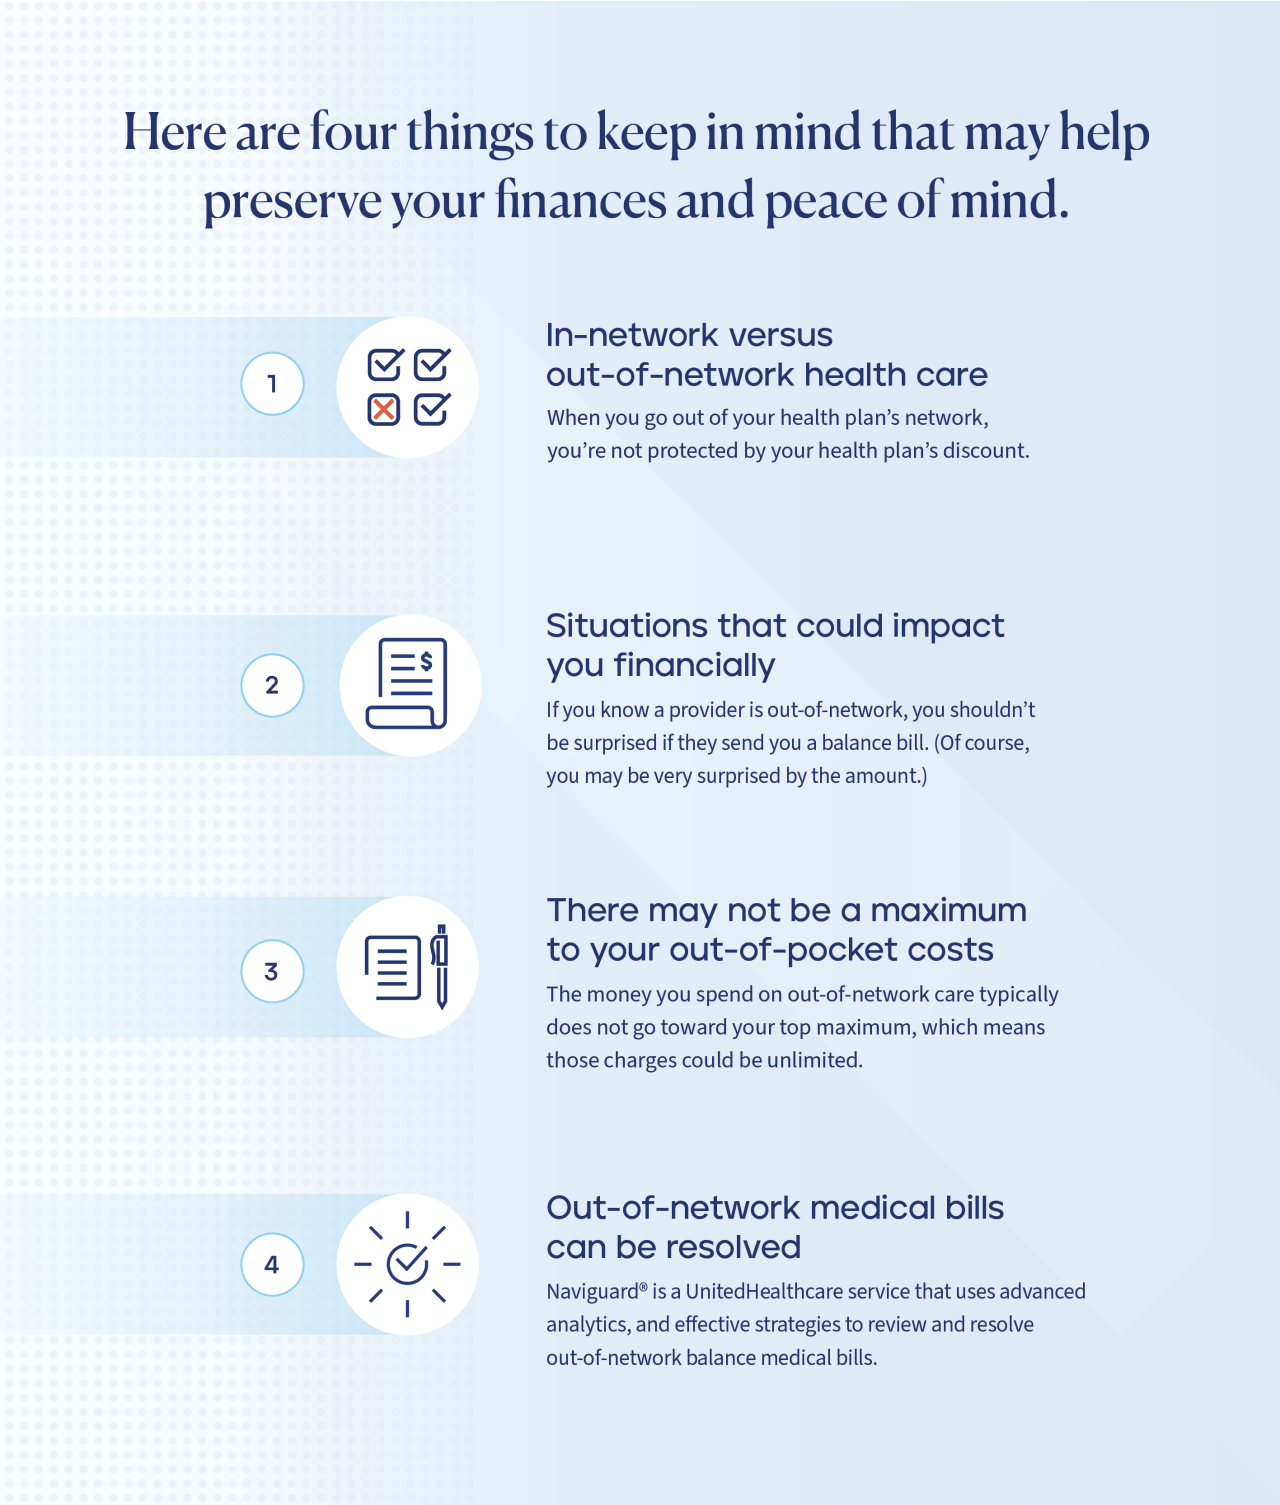 Infographic highlighting 4 tips for reducing out-of-network health care costs